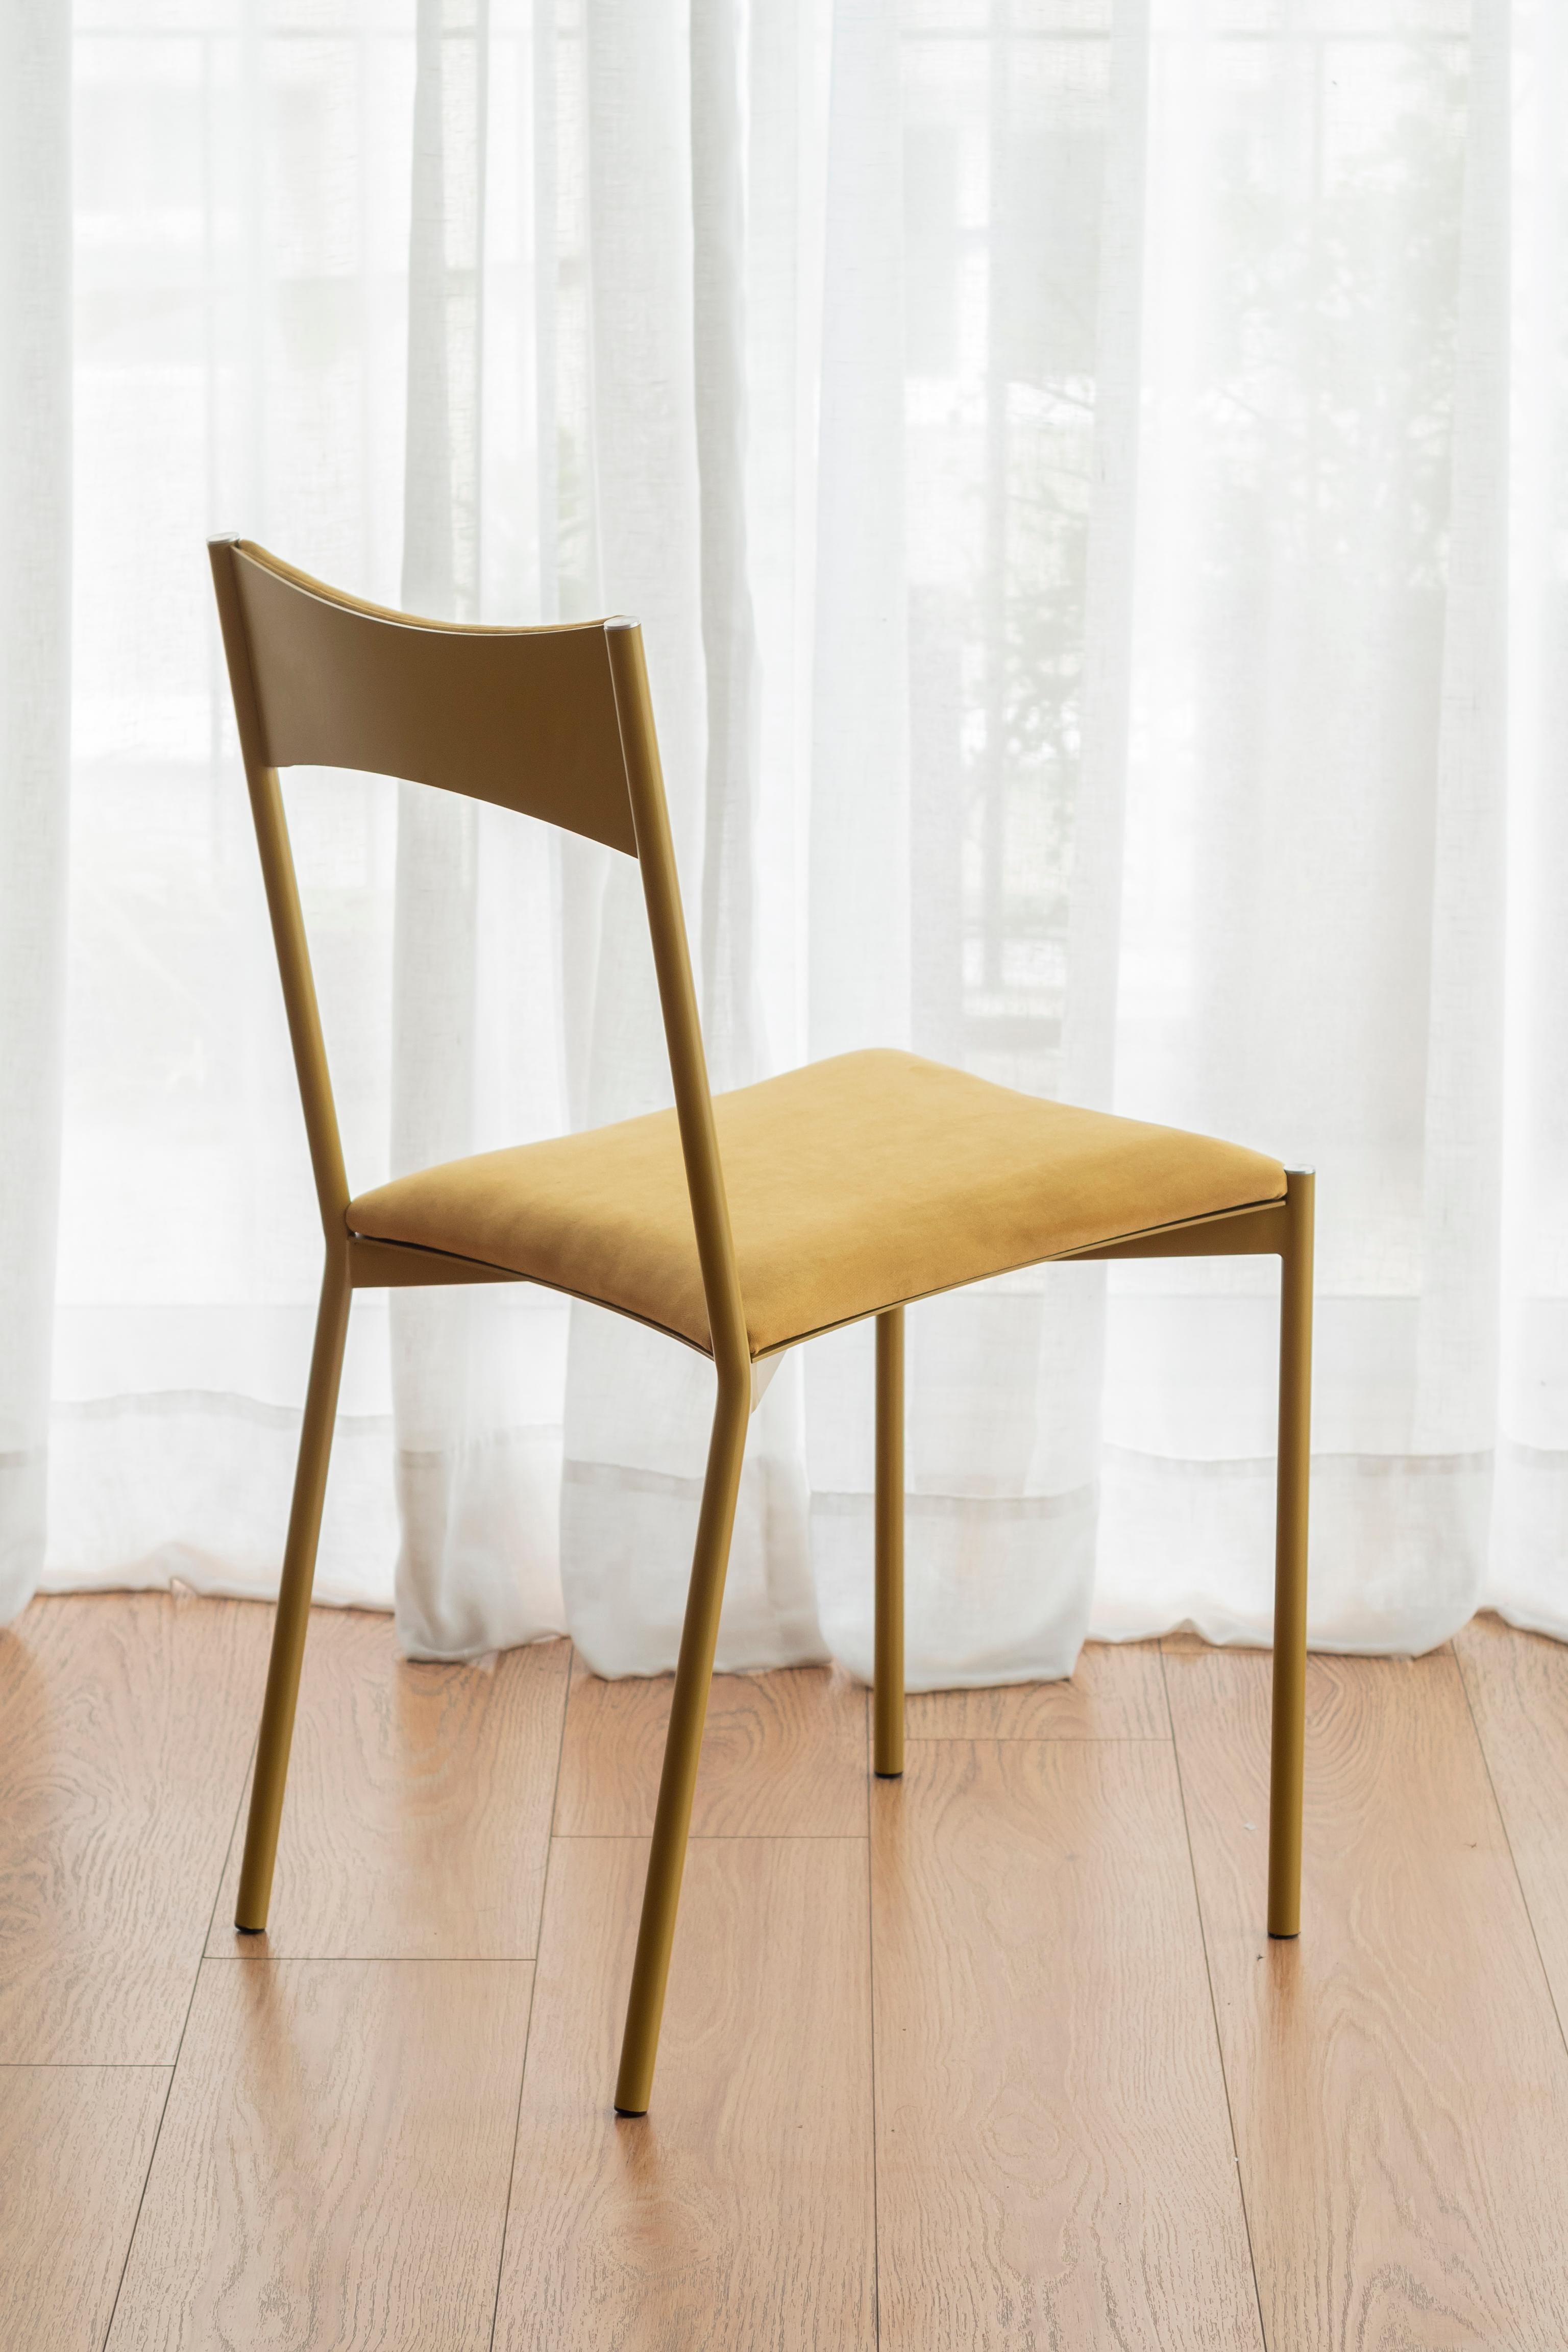 Other Set of 2 Tensa Chairs, Yellow by Ries